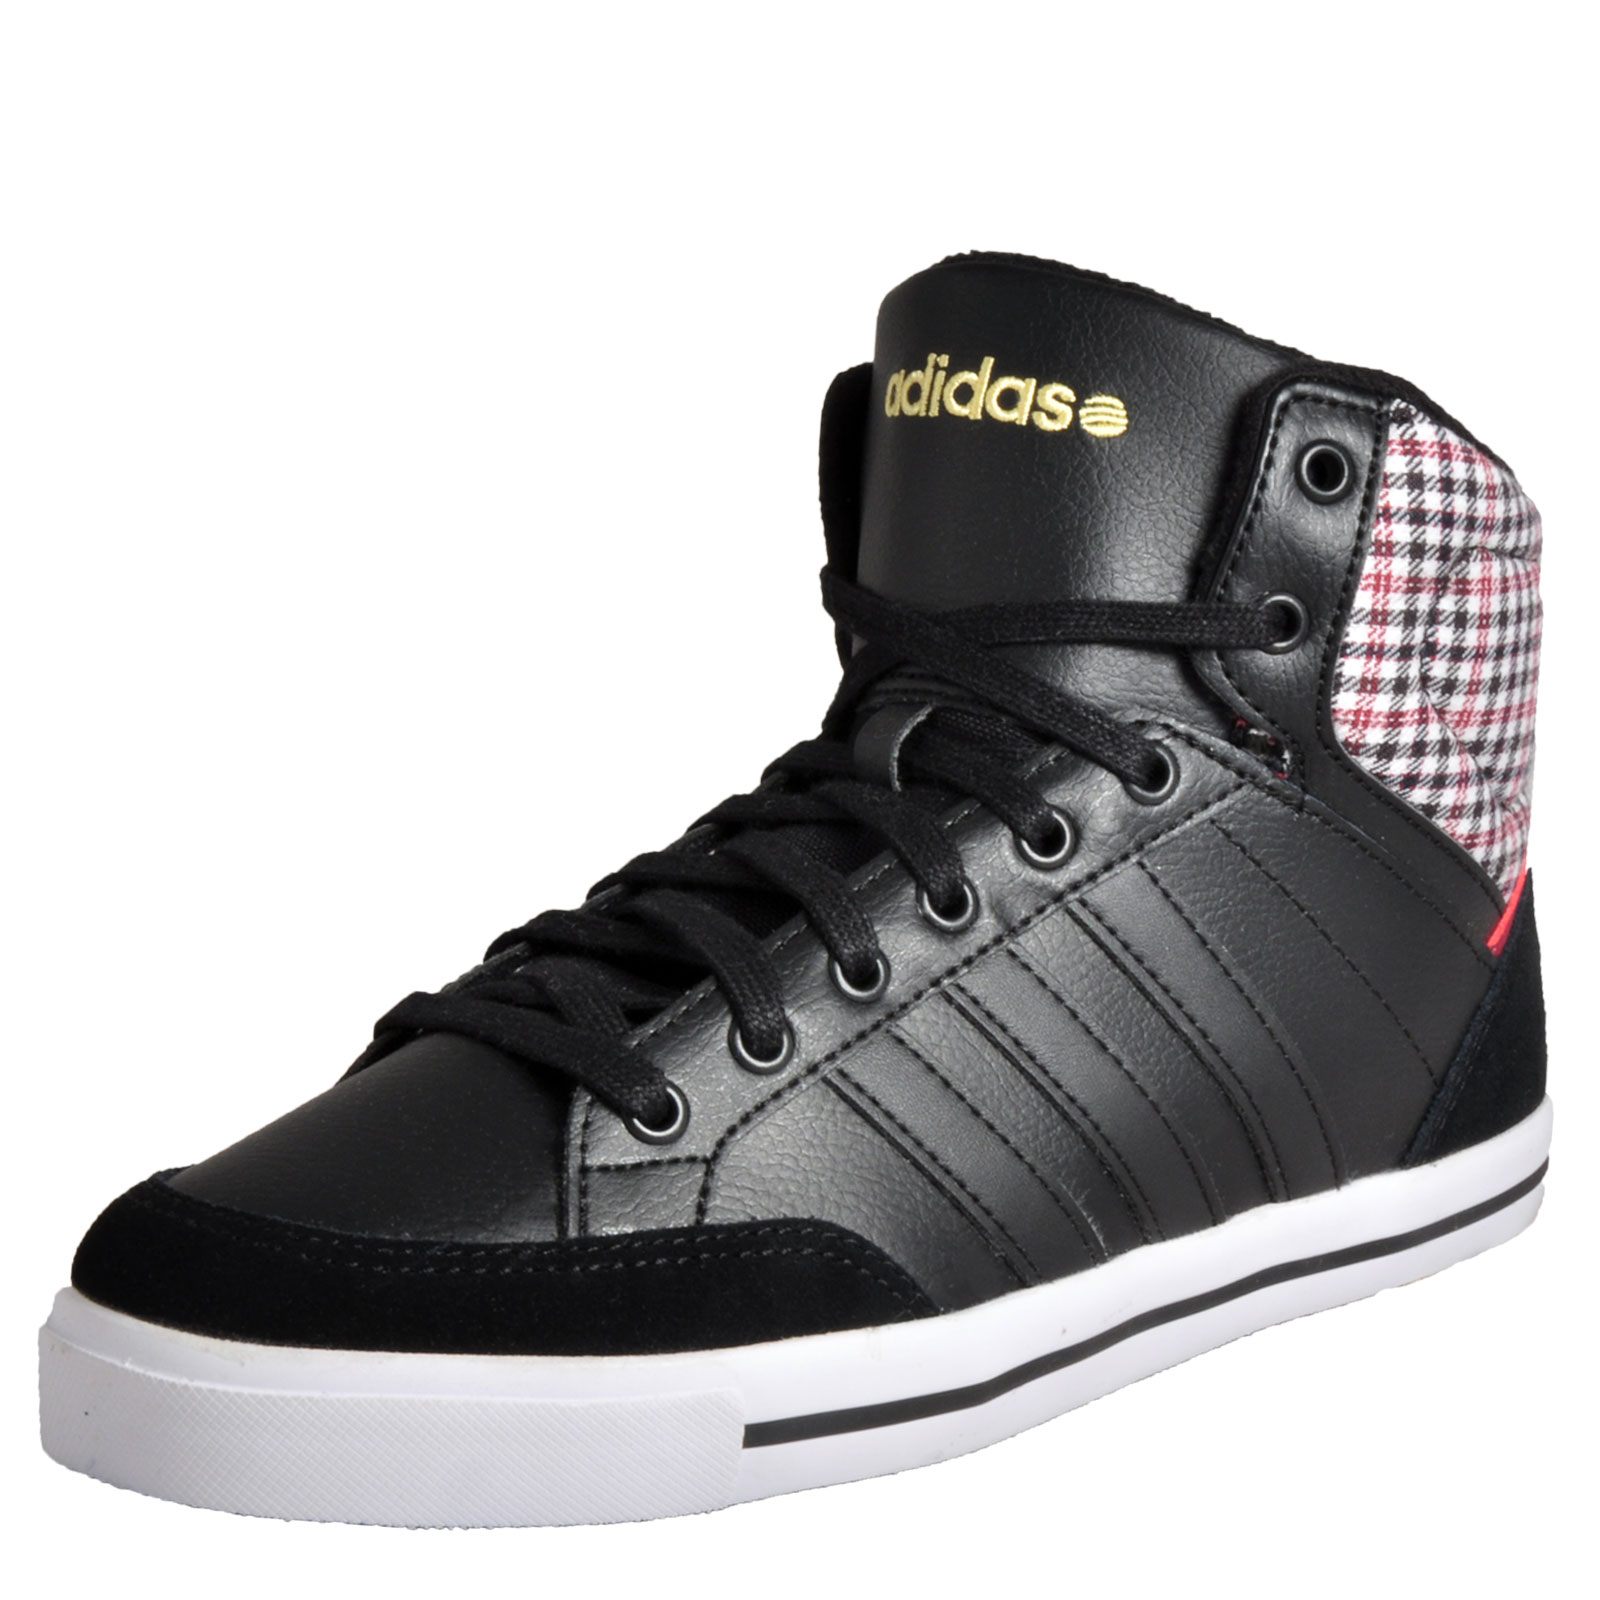 adidas neo cacity mid sneakers